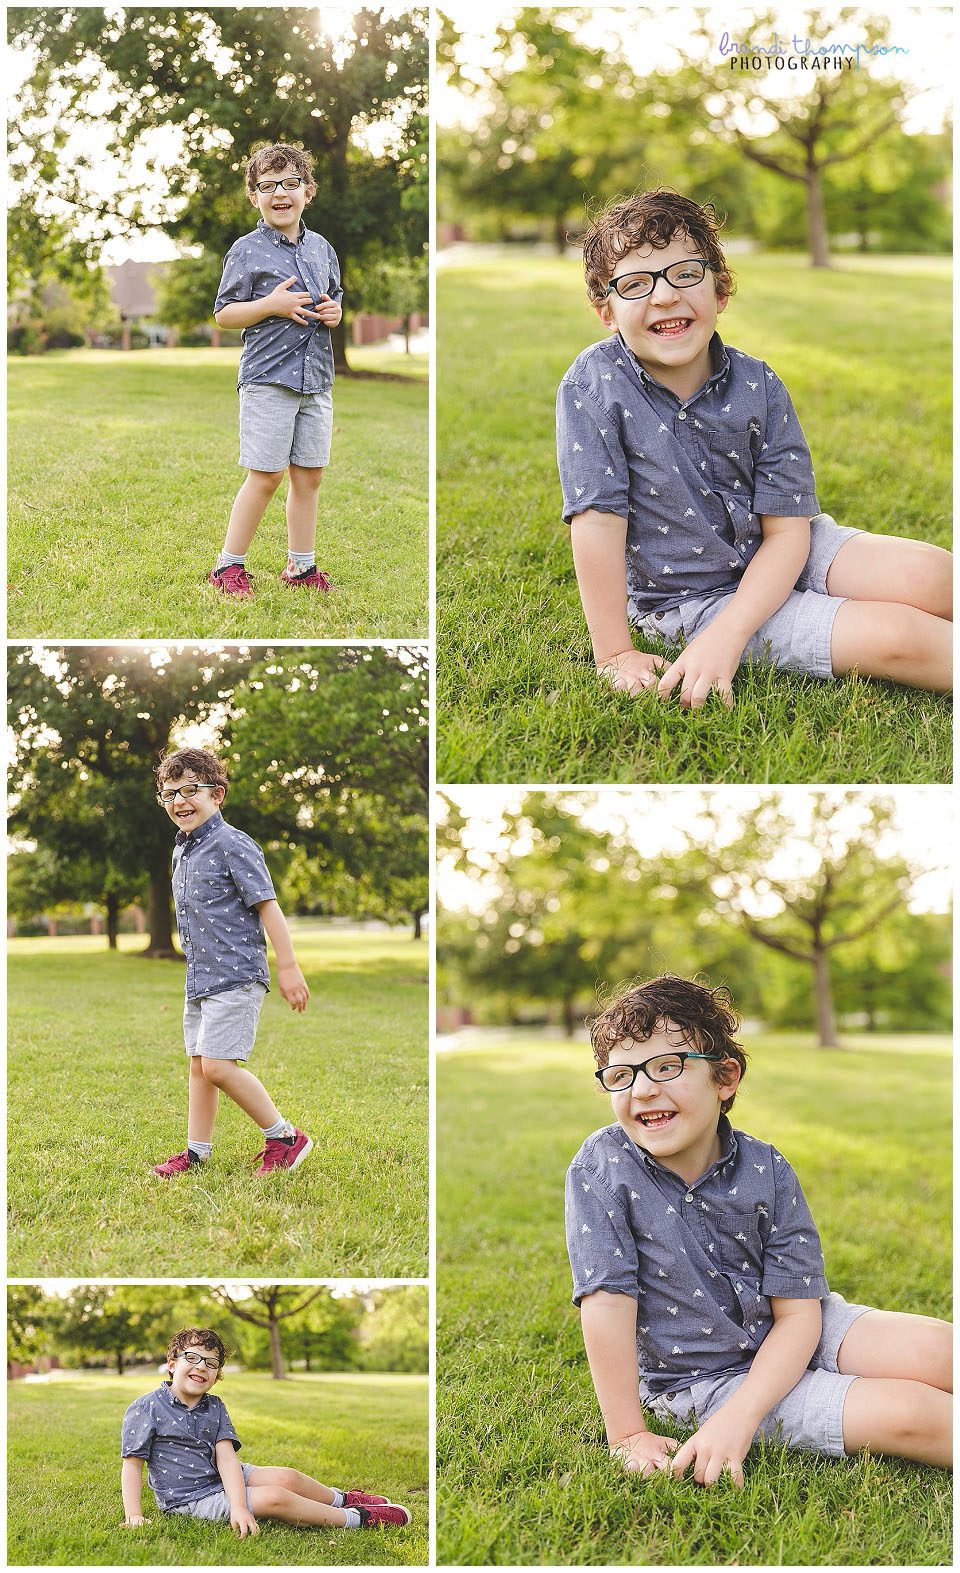 seven year old boy portraits in plano, tx - boy in blue shirt, tan shorts and glasses with red shoes